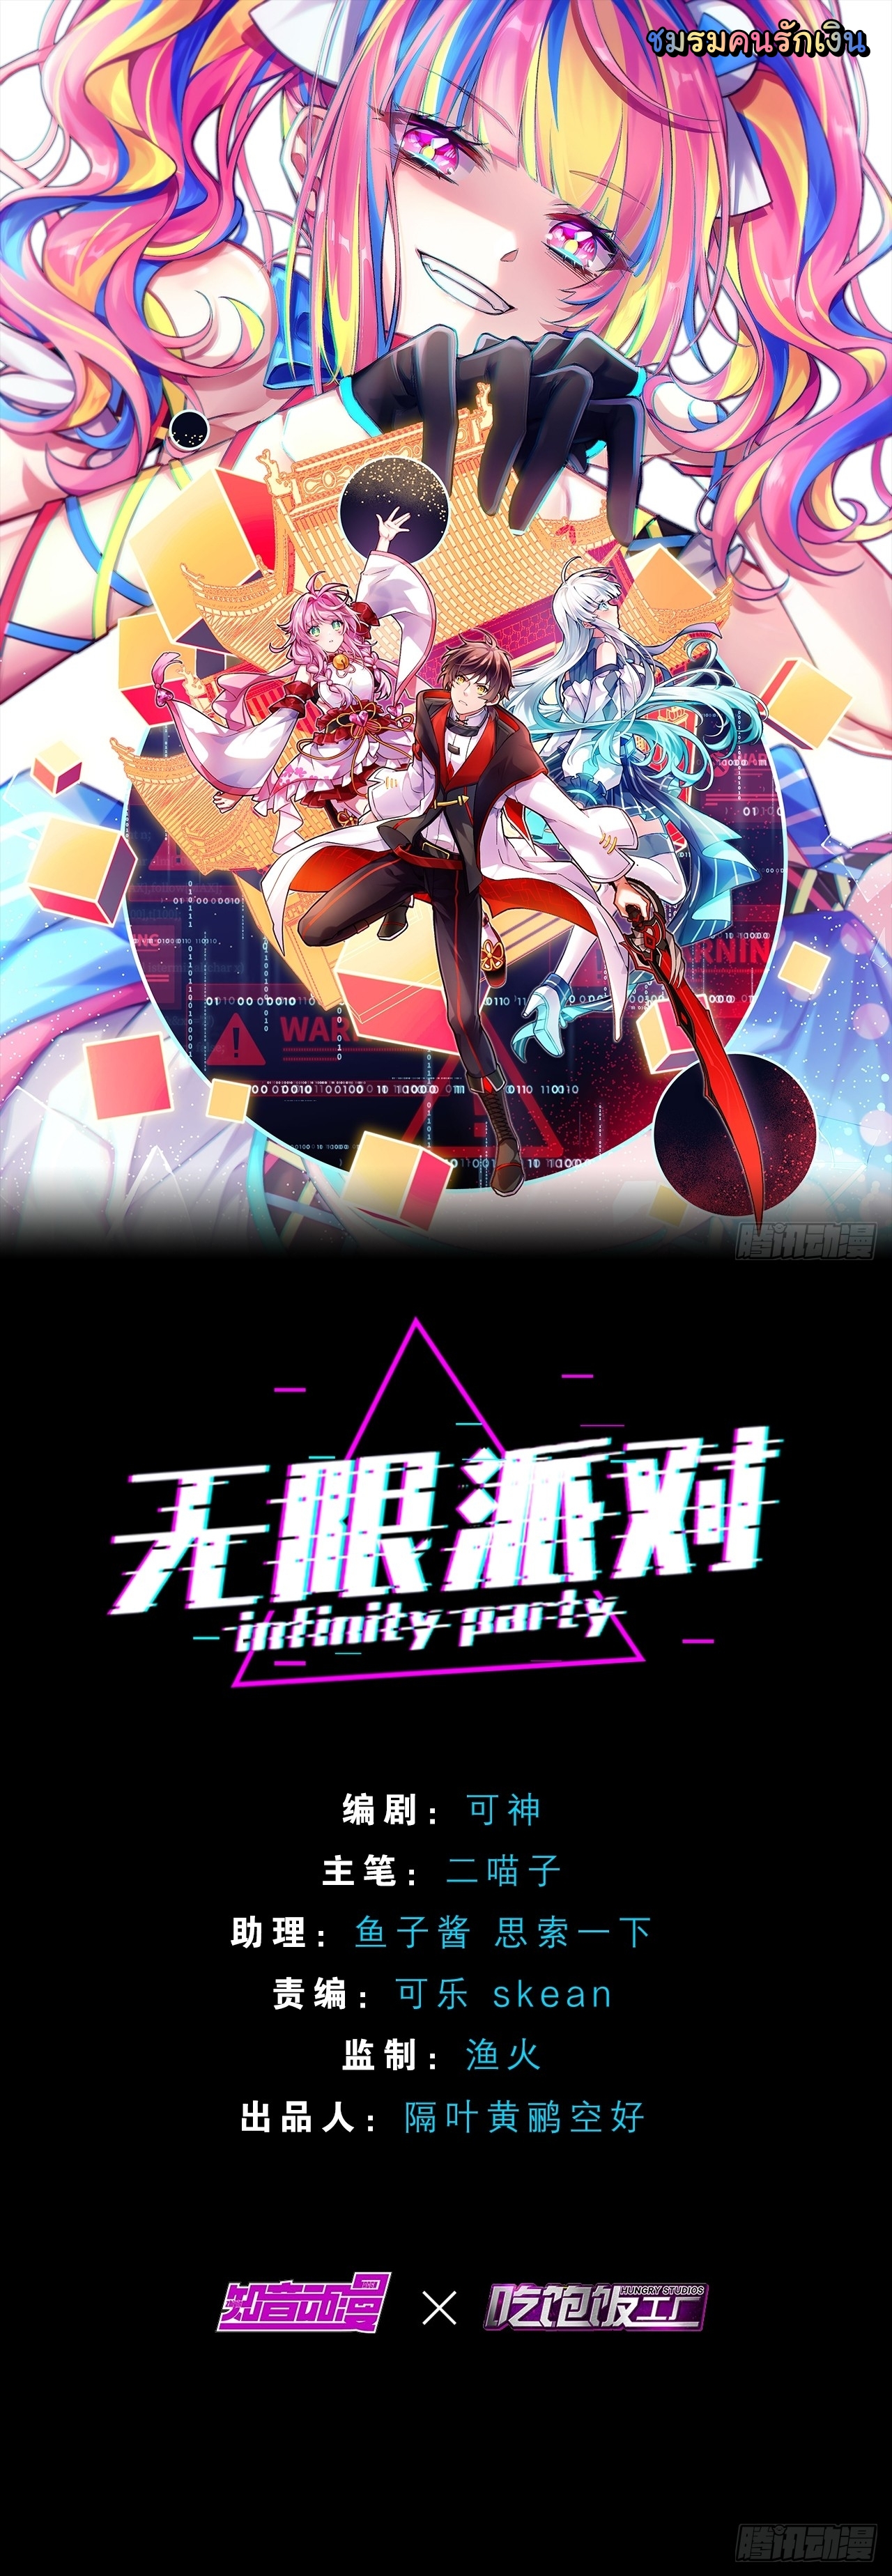 Infinity party 2 (1)